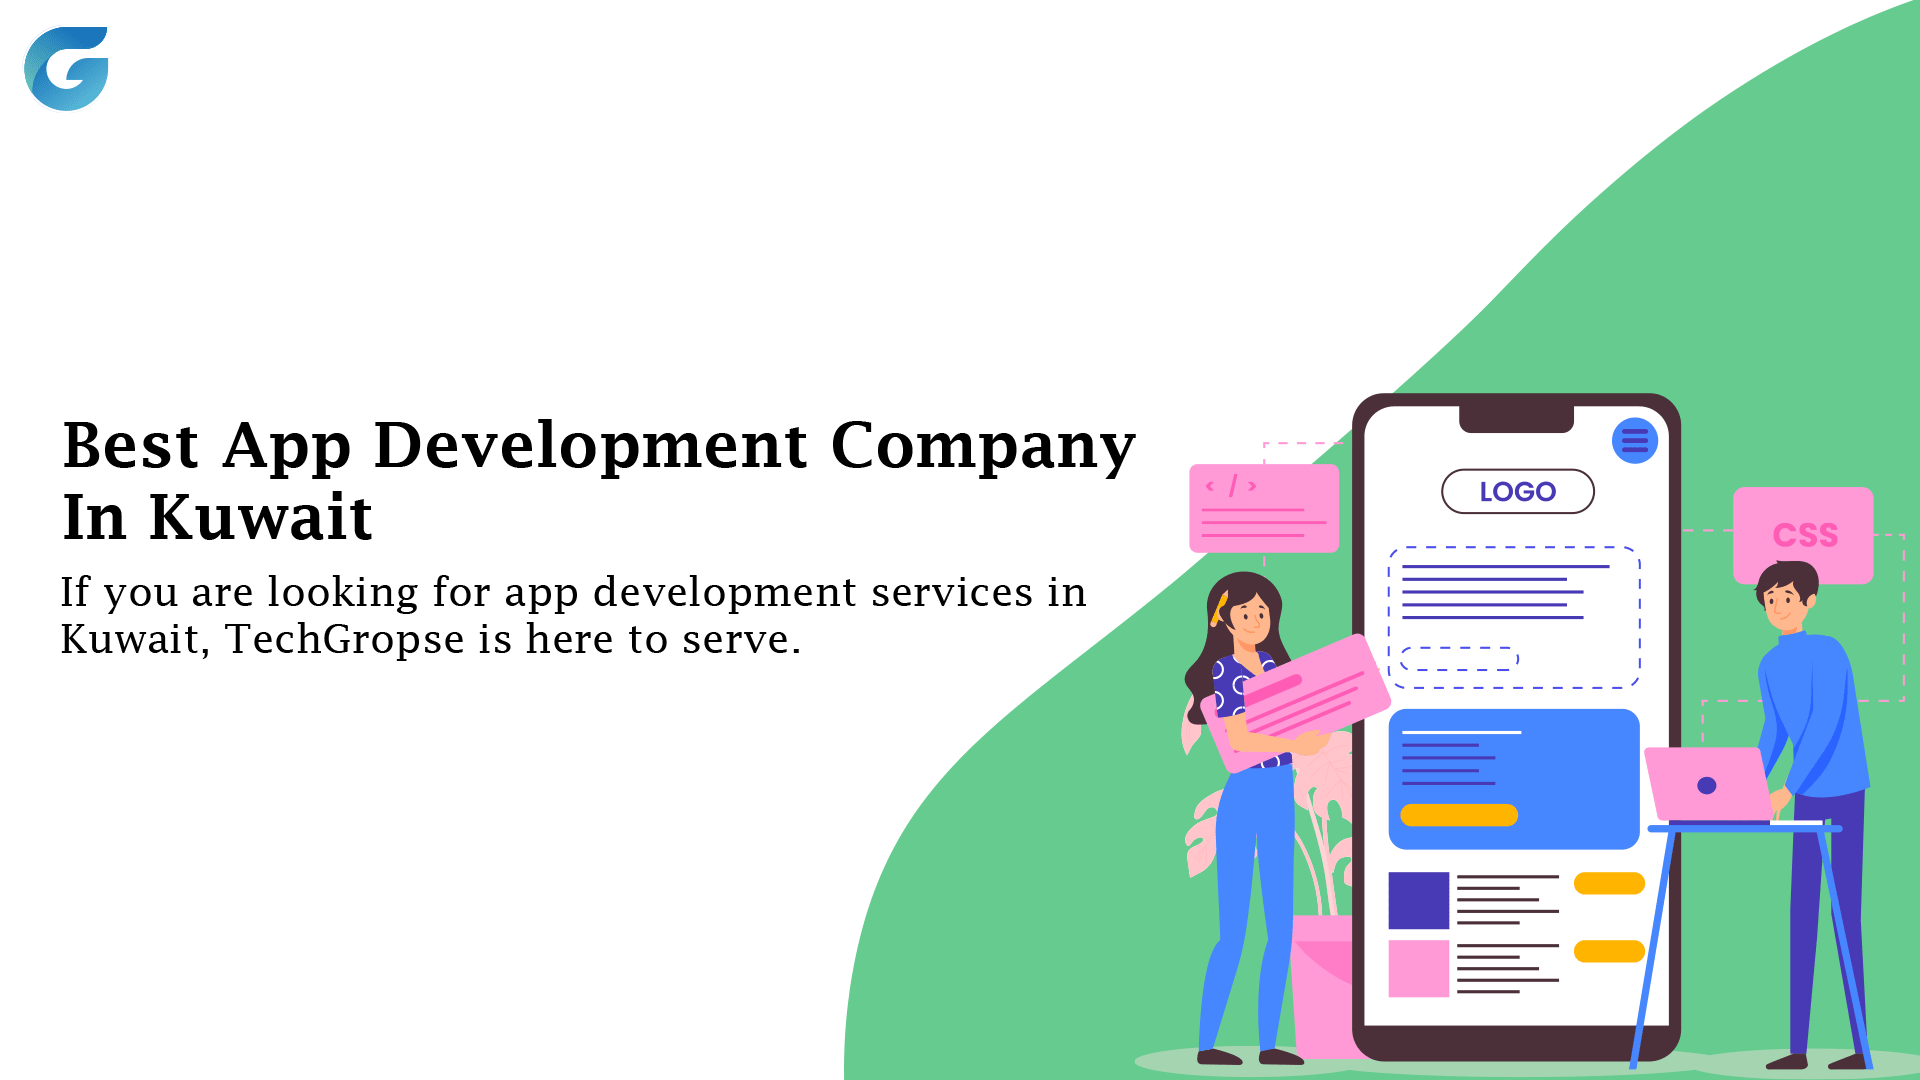 Number 1 Mobile App Development Company in Kuwait